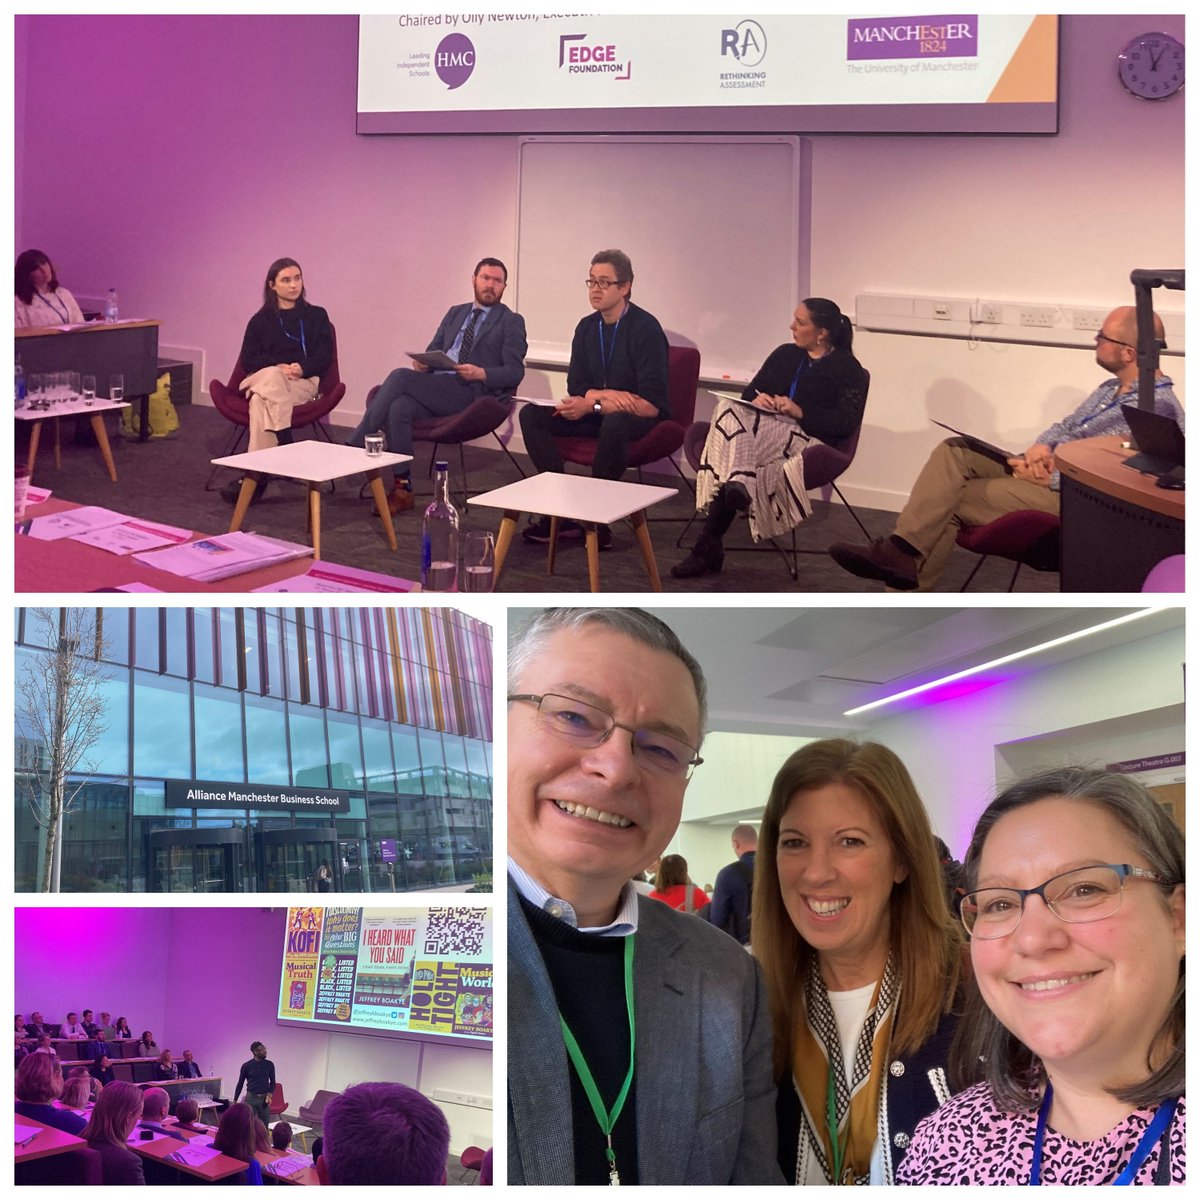 Great to see HMC colleagues at the second Next Generation Assessment Conference #ngaconf24 @OfficialUoM Business School. Thanks to Manchester, the Edge Foundation @ukEdge and Rethinking Assessment @rethinkassessmt Always a pleasure to work alongside you.